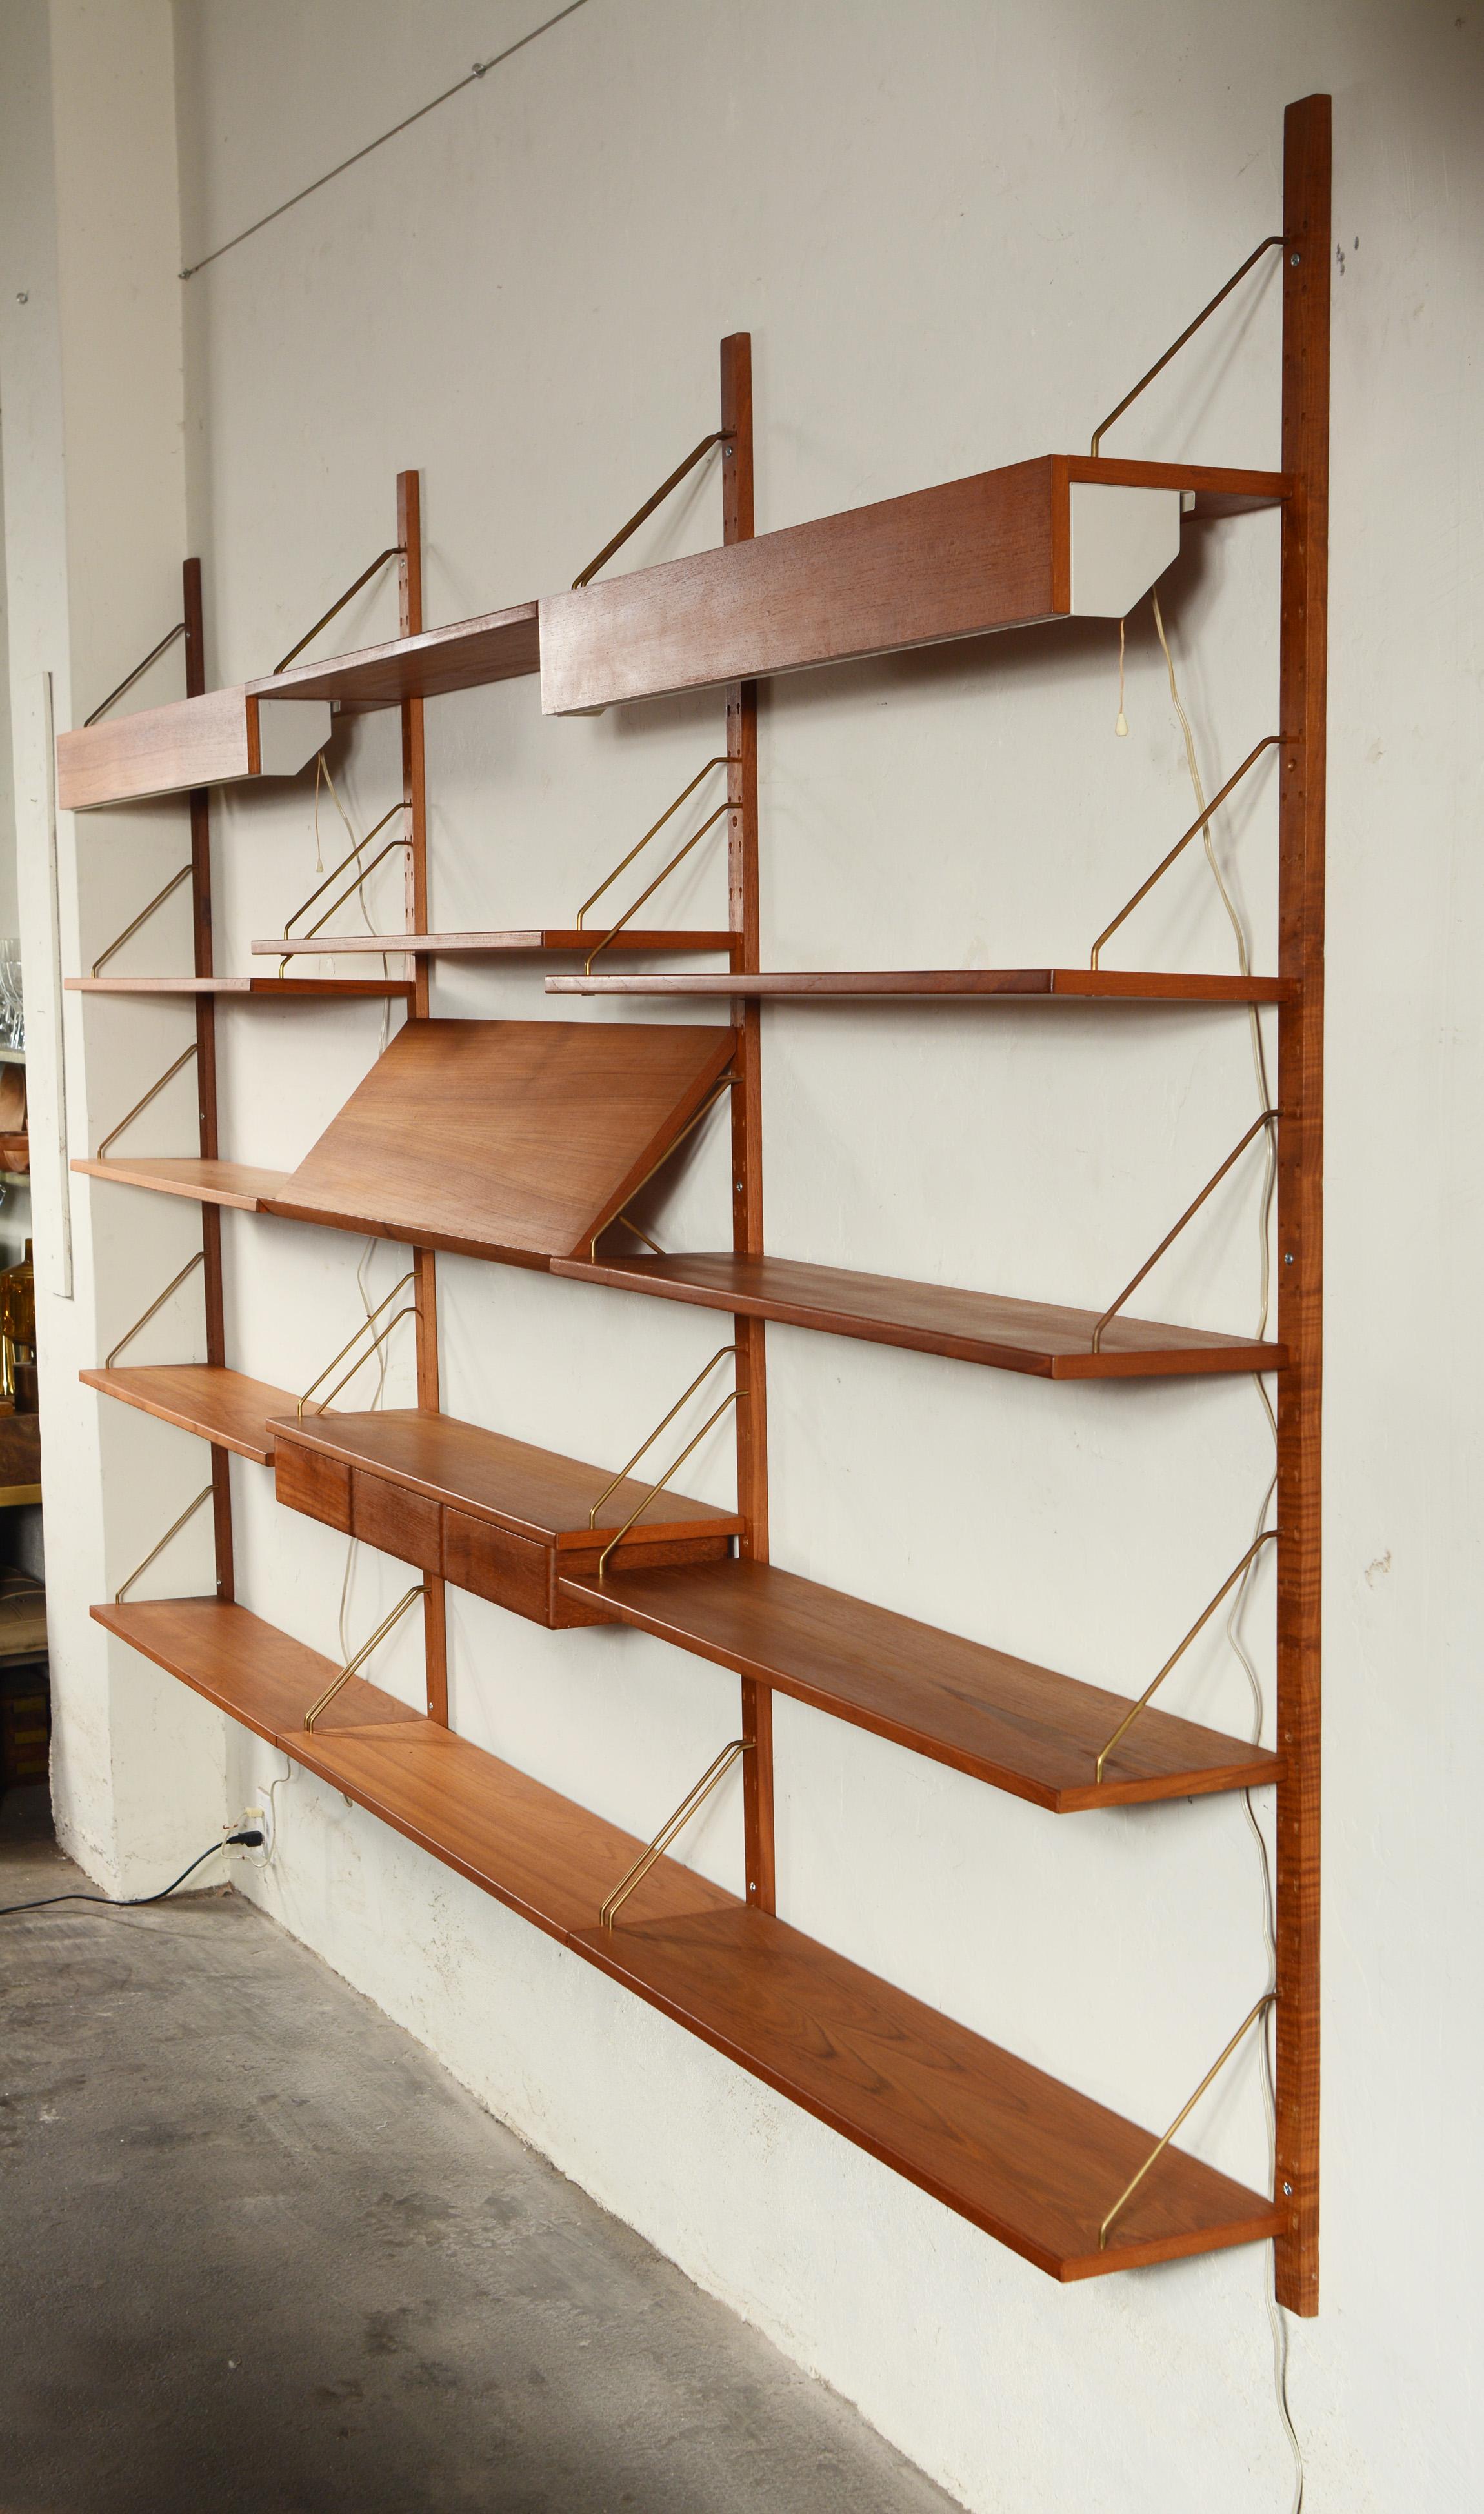 Omnibus wall unit designed by Sven Ellekaer. These were made by Albert Hansen in Denmark and imported to the United States by Raymor. As shown there are two shelves with lights, eleven shelves, one shelf with drawers underneath, one magazine shelf